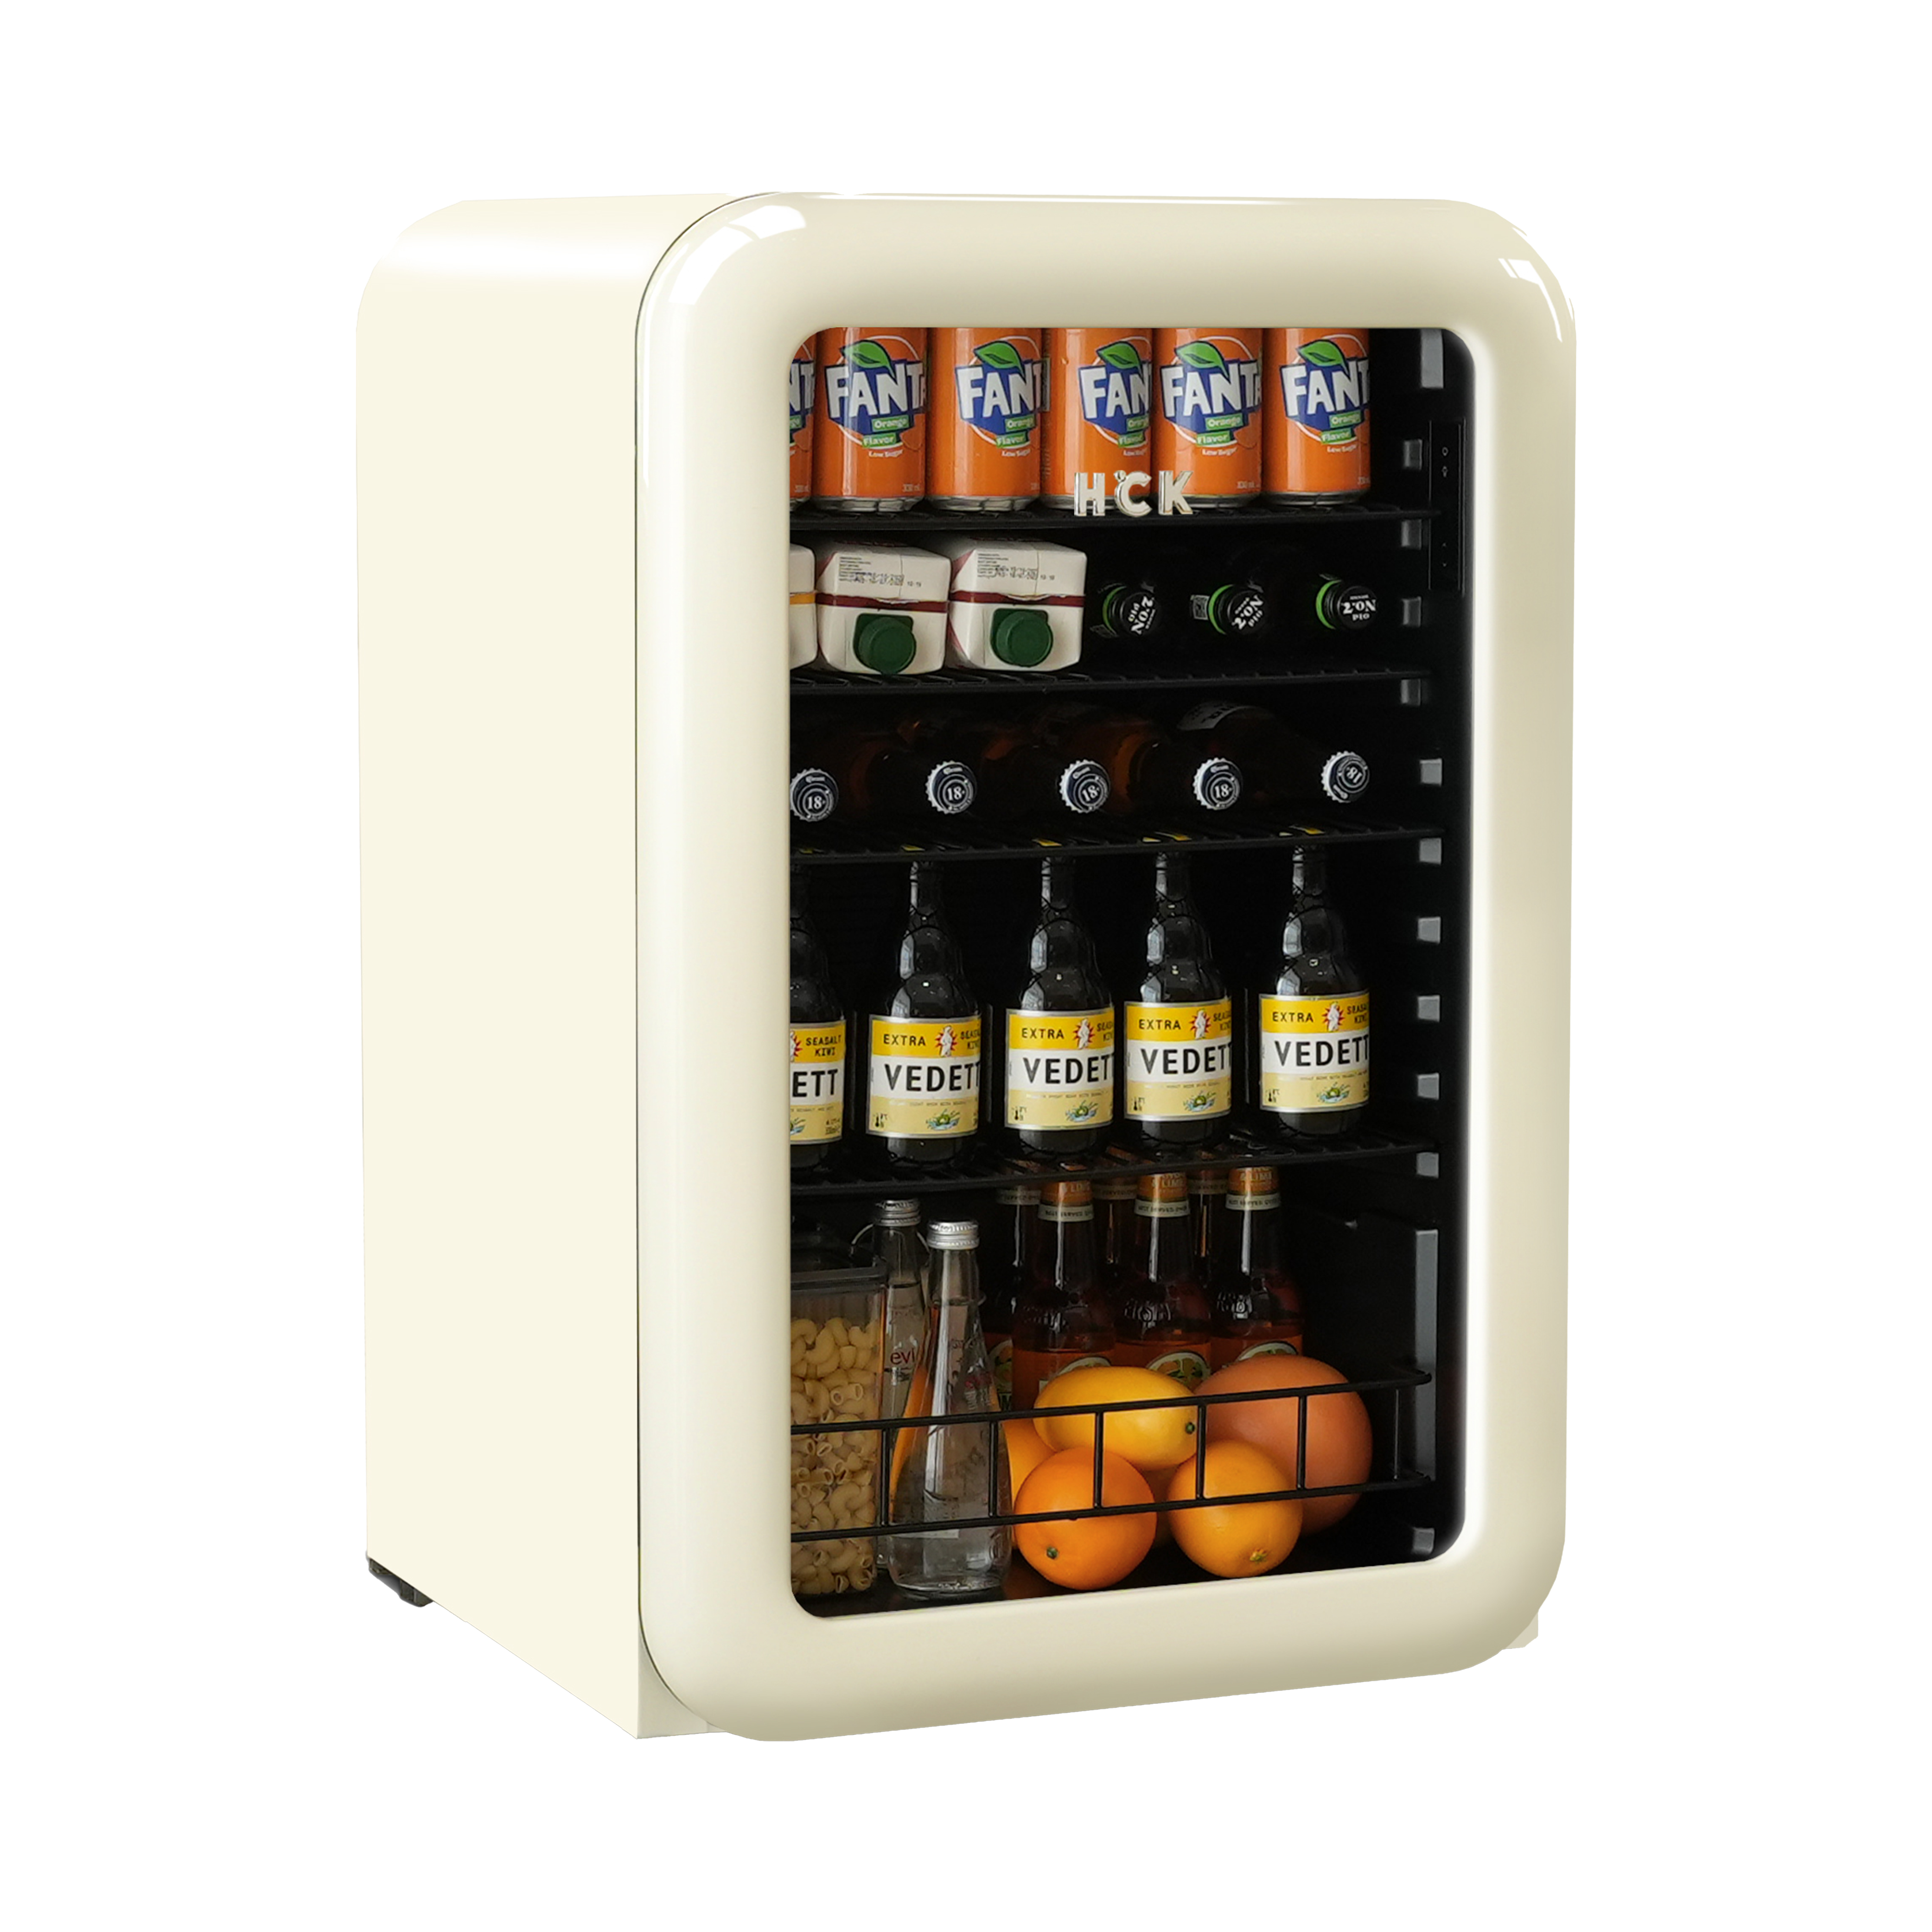 Side view of a 4.1 Cu Ft Iconic Retro Style Beverage Fridge with transparent door, revealing its contents.